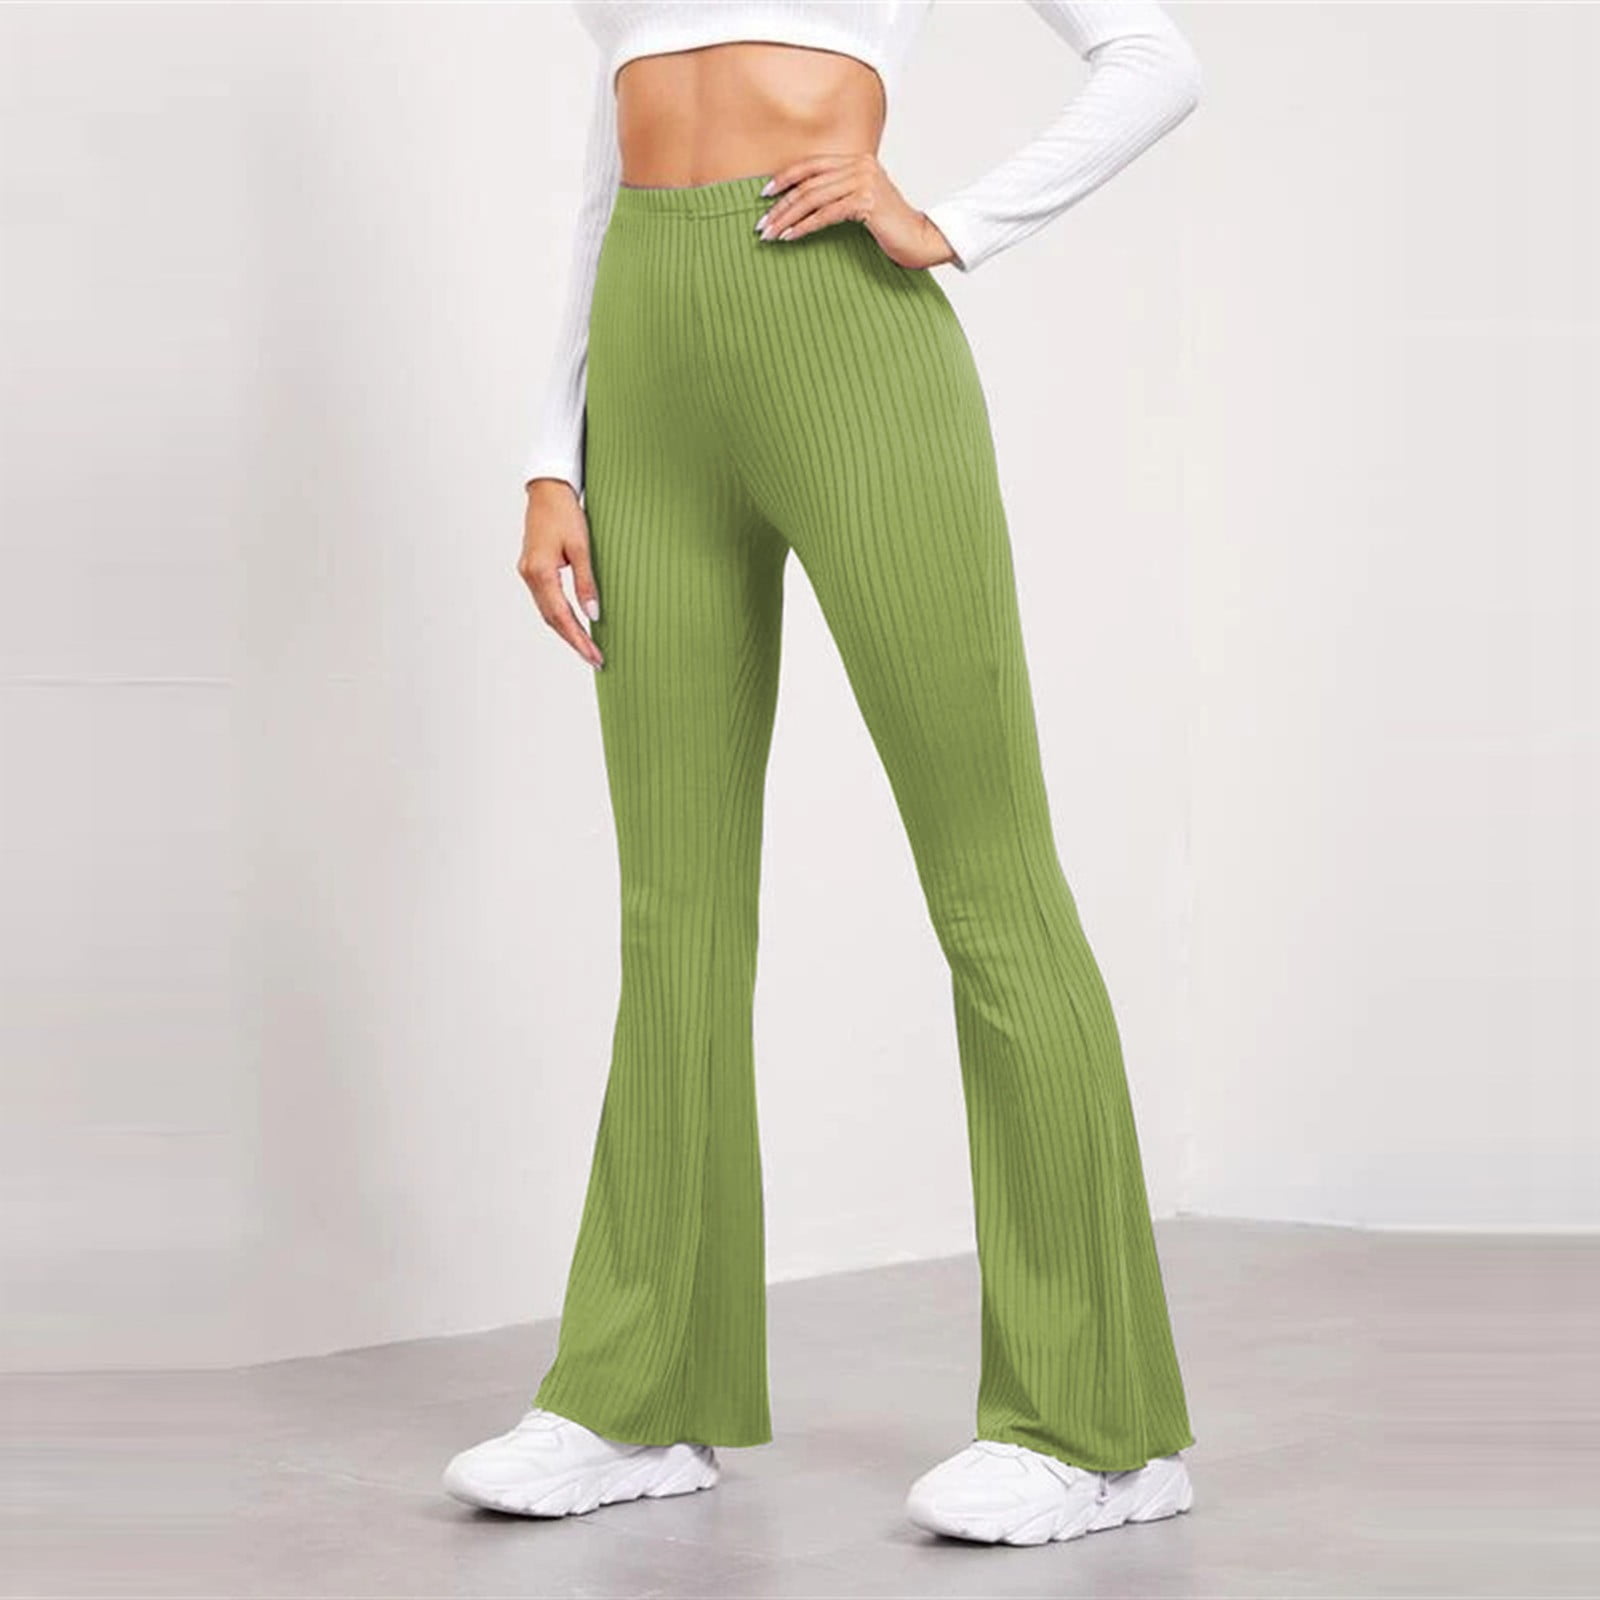 JWZUY Flare Pant Ribbed Knit Pants for Women Bootcut High Waisted Leggings  Workout Stretch Pants Green M